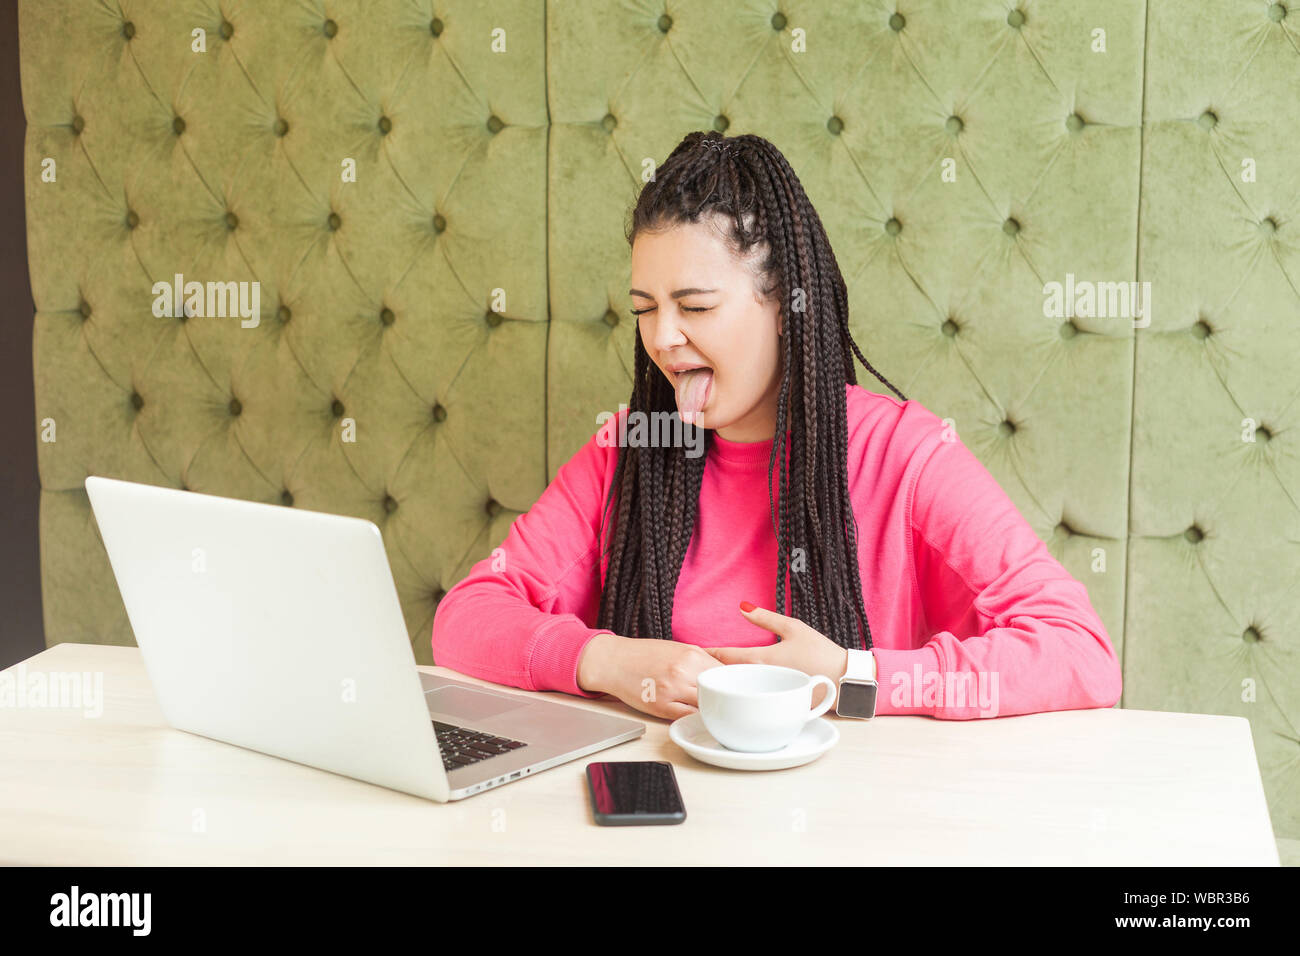 Portrait of beautiful childish funny young girl freelancer with black dreadlocks hairstyle in pink blouse sitting and showing tongue out on webcamera Stock Photo